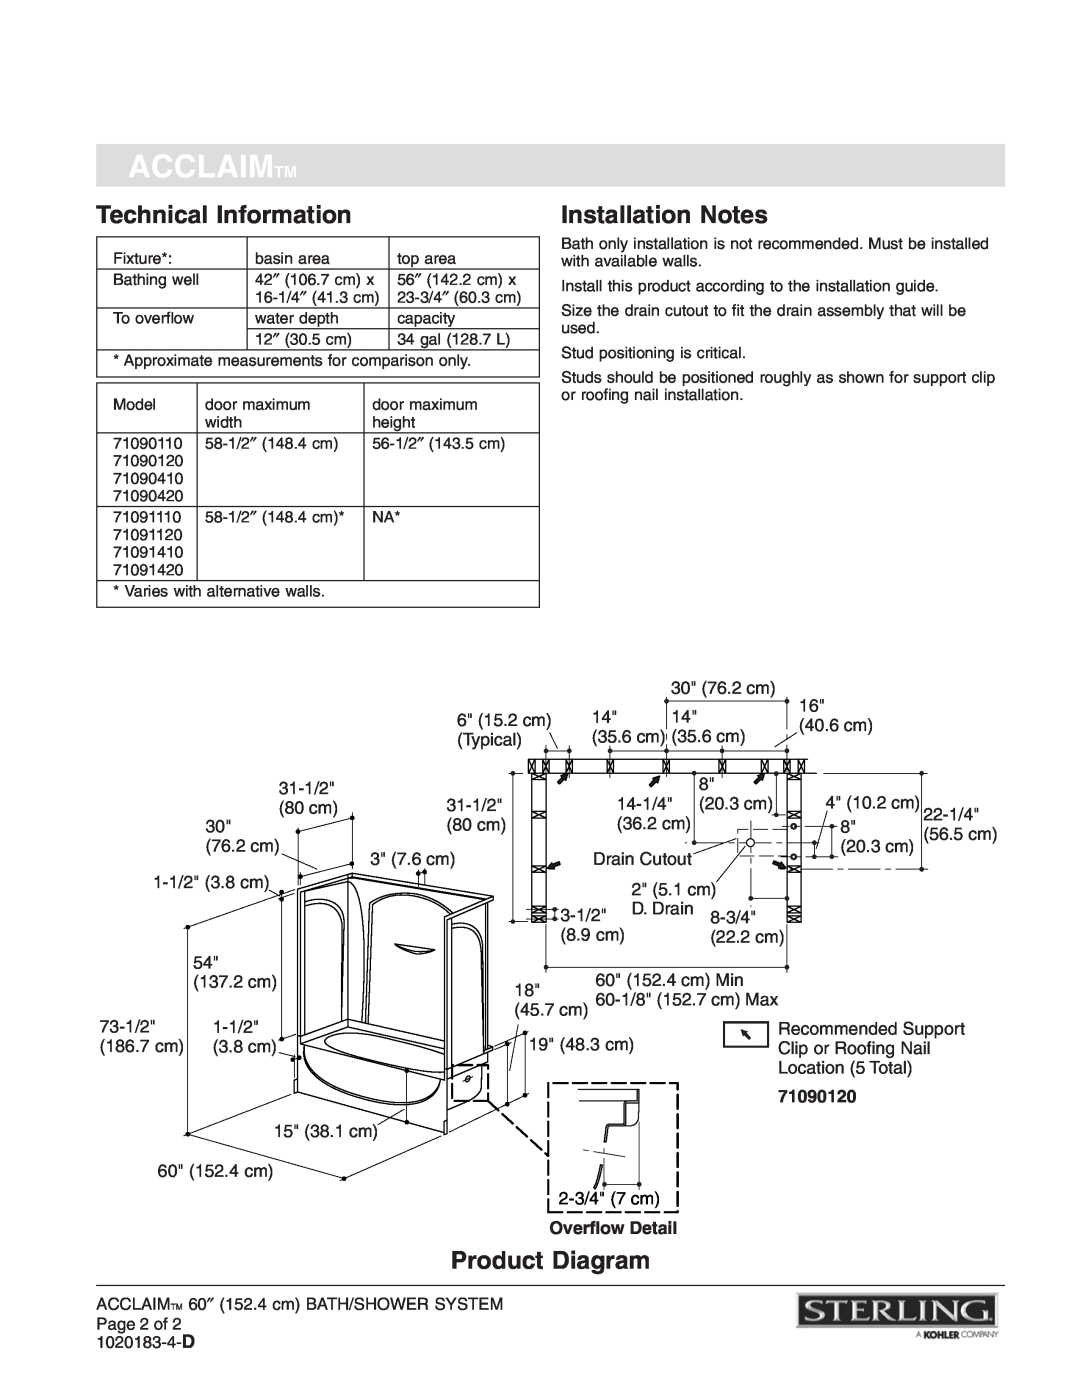 Sterling Plumbing 71090120 warranty Technical Information, Installation Notes, Product Diagram, Acclaimtm, Overflow Detail 